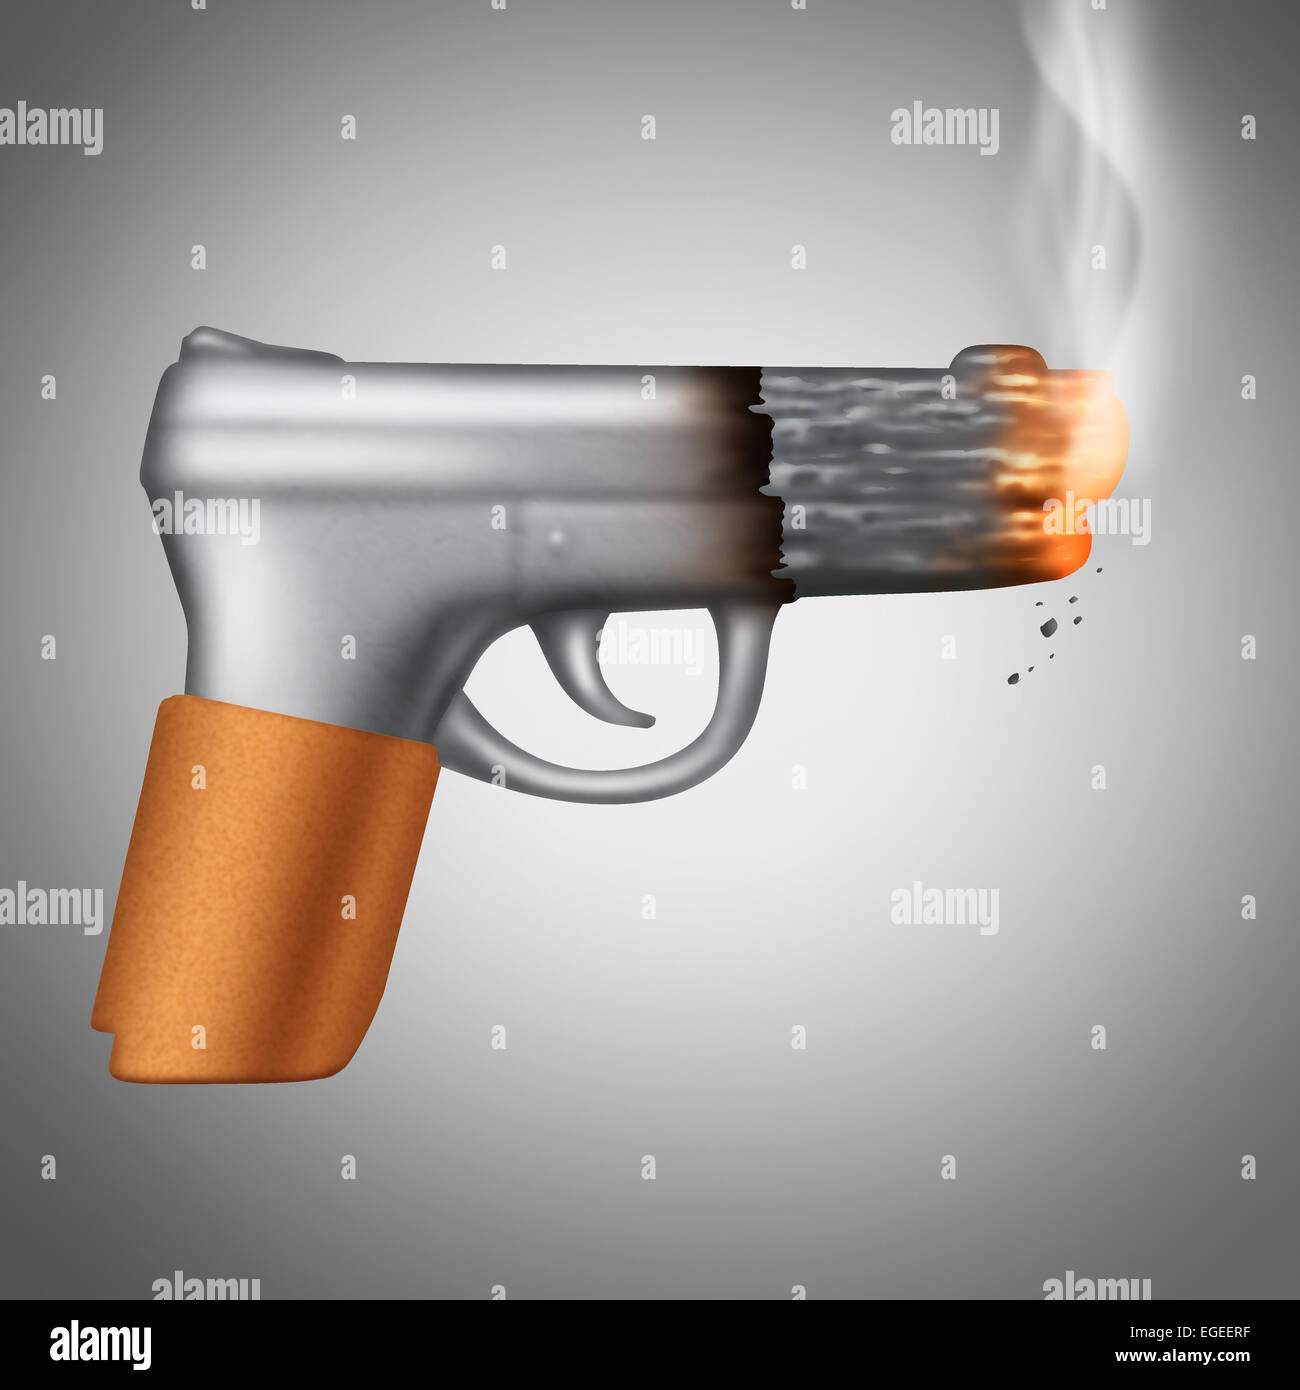 Smoking Cigarette concept as a tobacco product shaped as a lethal handgun or pistol as a health care metaphor and unhealthy symbol for the danger of smoke carcinogens. Stock Photo